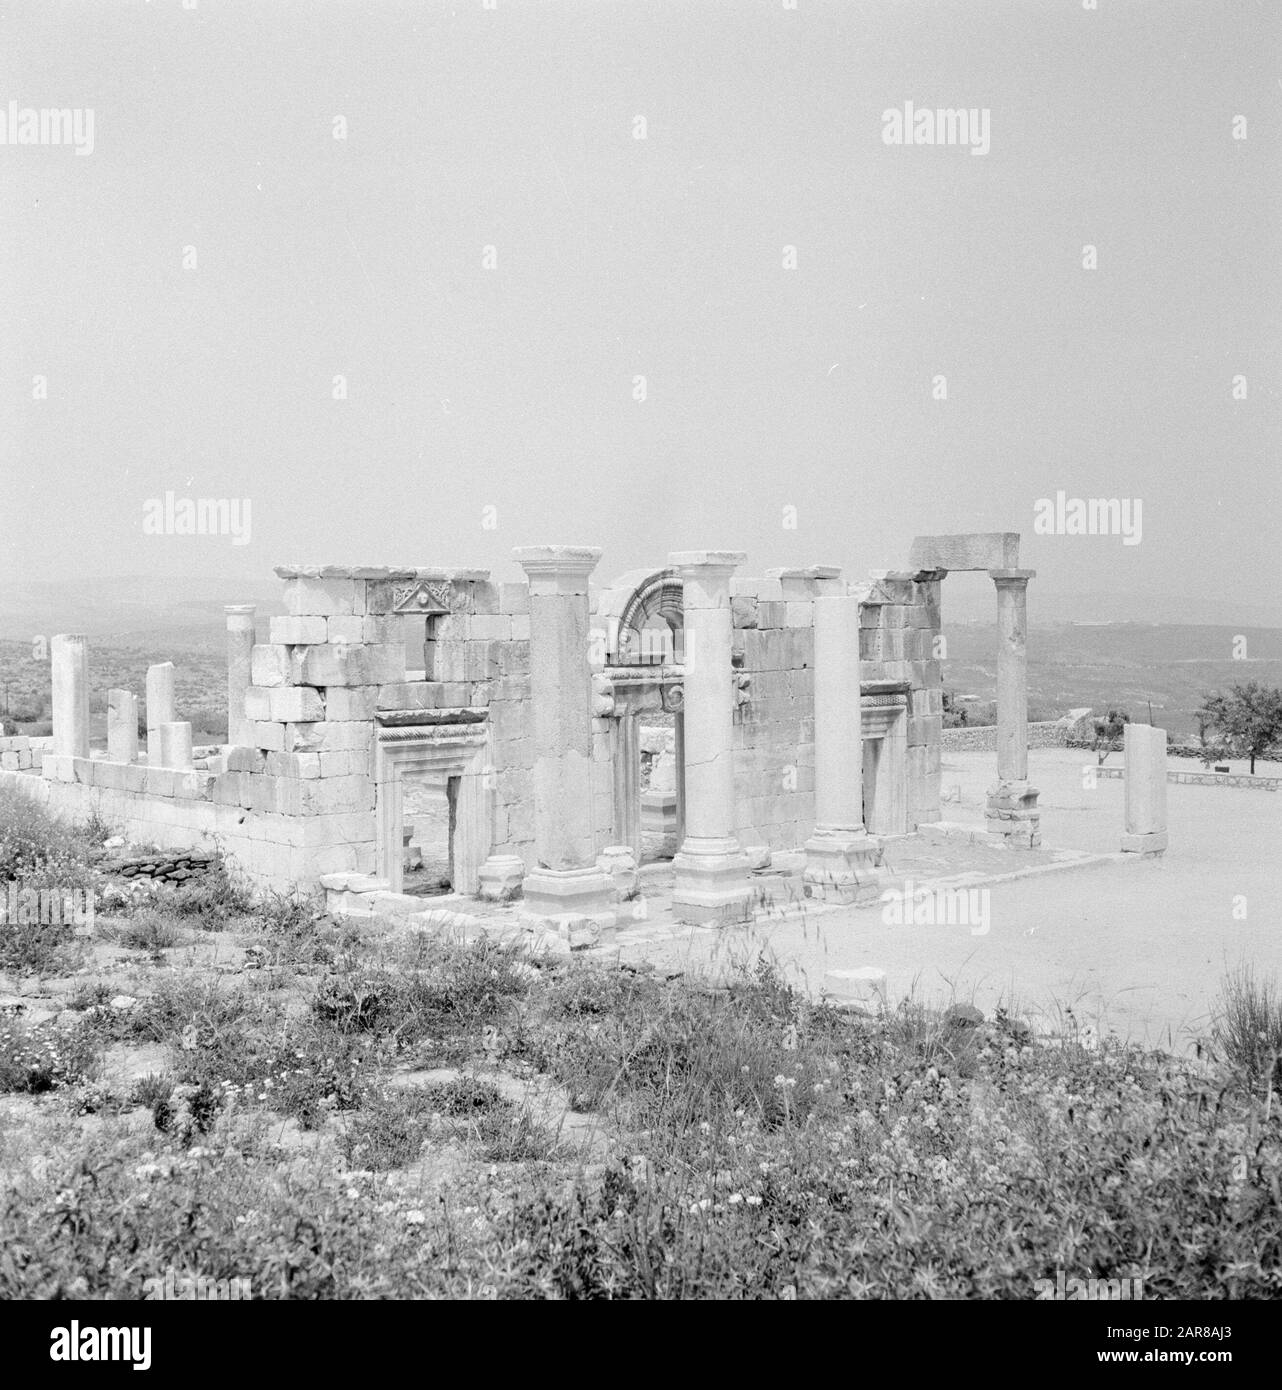 Israel 1964-1965: Bar'am, ruin synagogue  Ruins of the ancient synagogue in Kfar Bar'am Annotation: Bar'am is a kibbutz in northern Israel, located about 300 meters from the border with Lebanon. Bar'am National Park is known for the remains of one of Israel's oldest synagogues Date: 1964 Location: Bar'am, Israel Keywords: archeology, pillars, ruins, synagogues Stock Photo